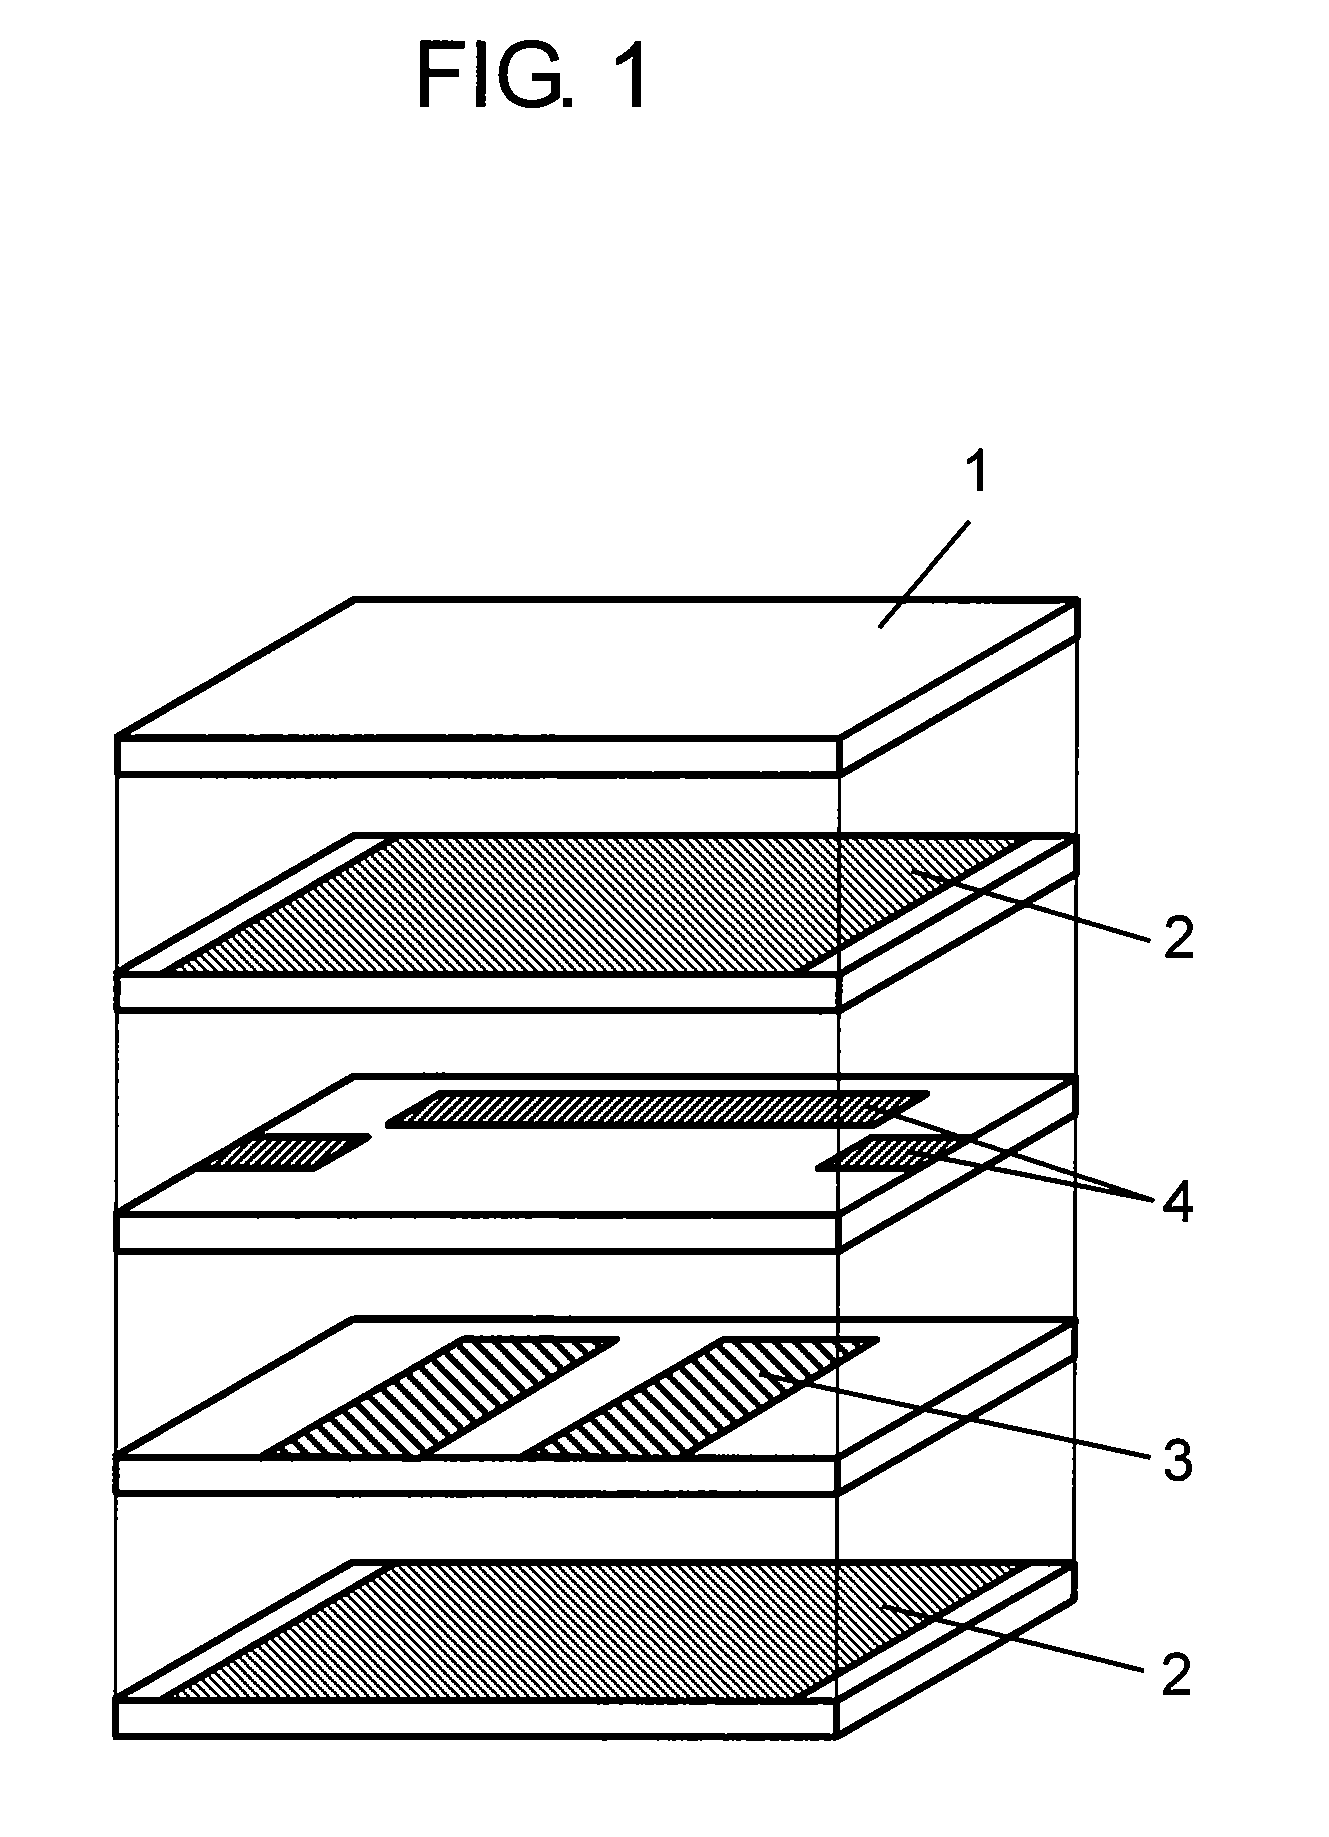 Ceramic laminated device and method for manufacturing same